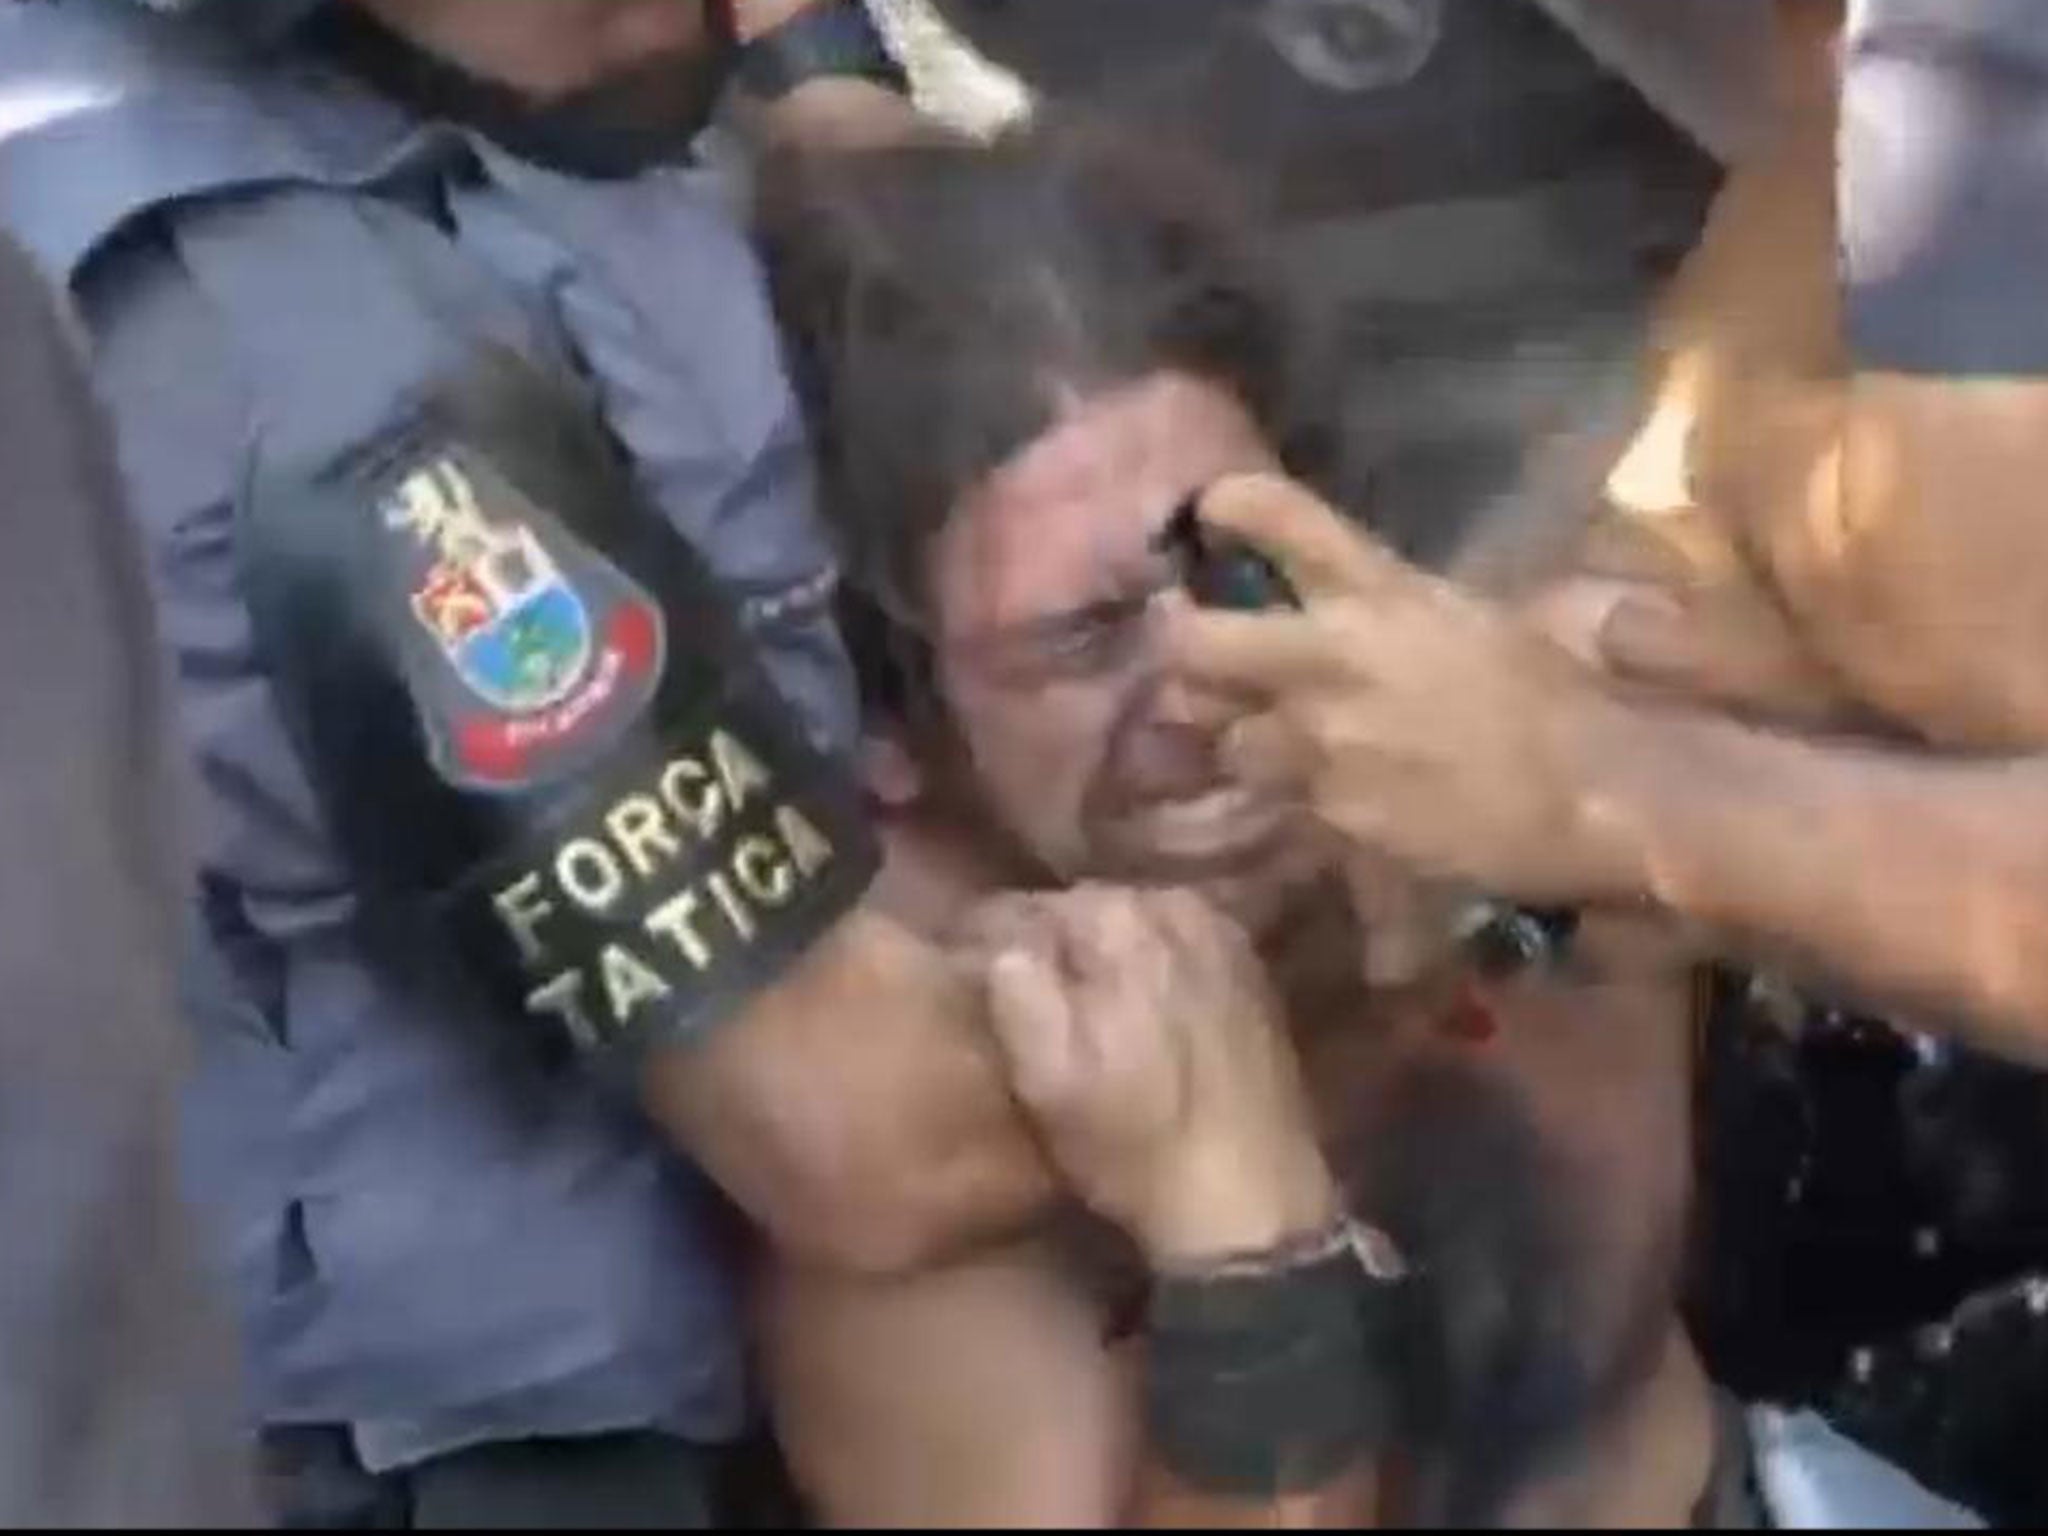 Shocking video footage has emerged showing an anti-World Cup protester as he is sprayed in the eyes by riot police with pepper spray at point blank range.